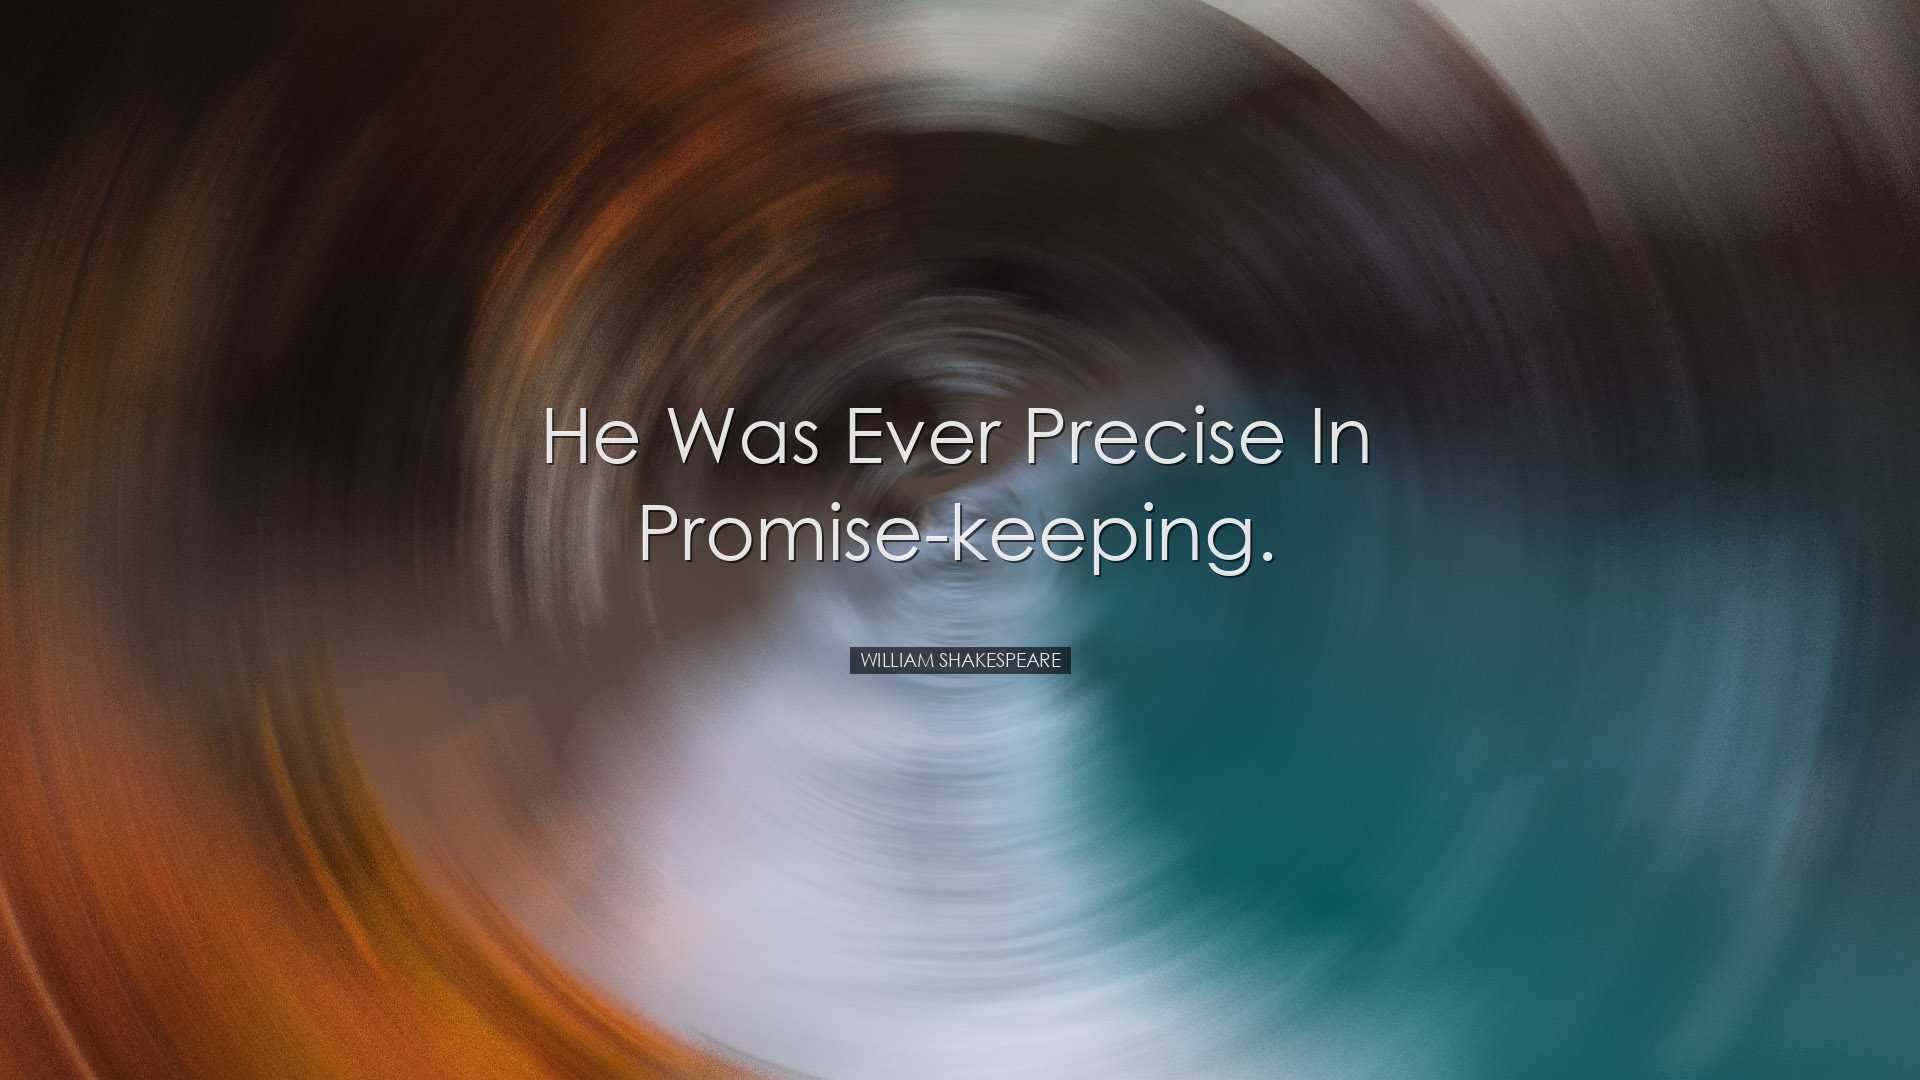 He was ever precise in promise-keeping. - William Shakespeare